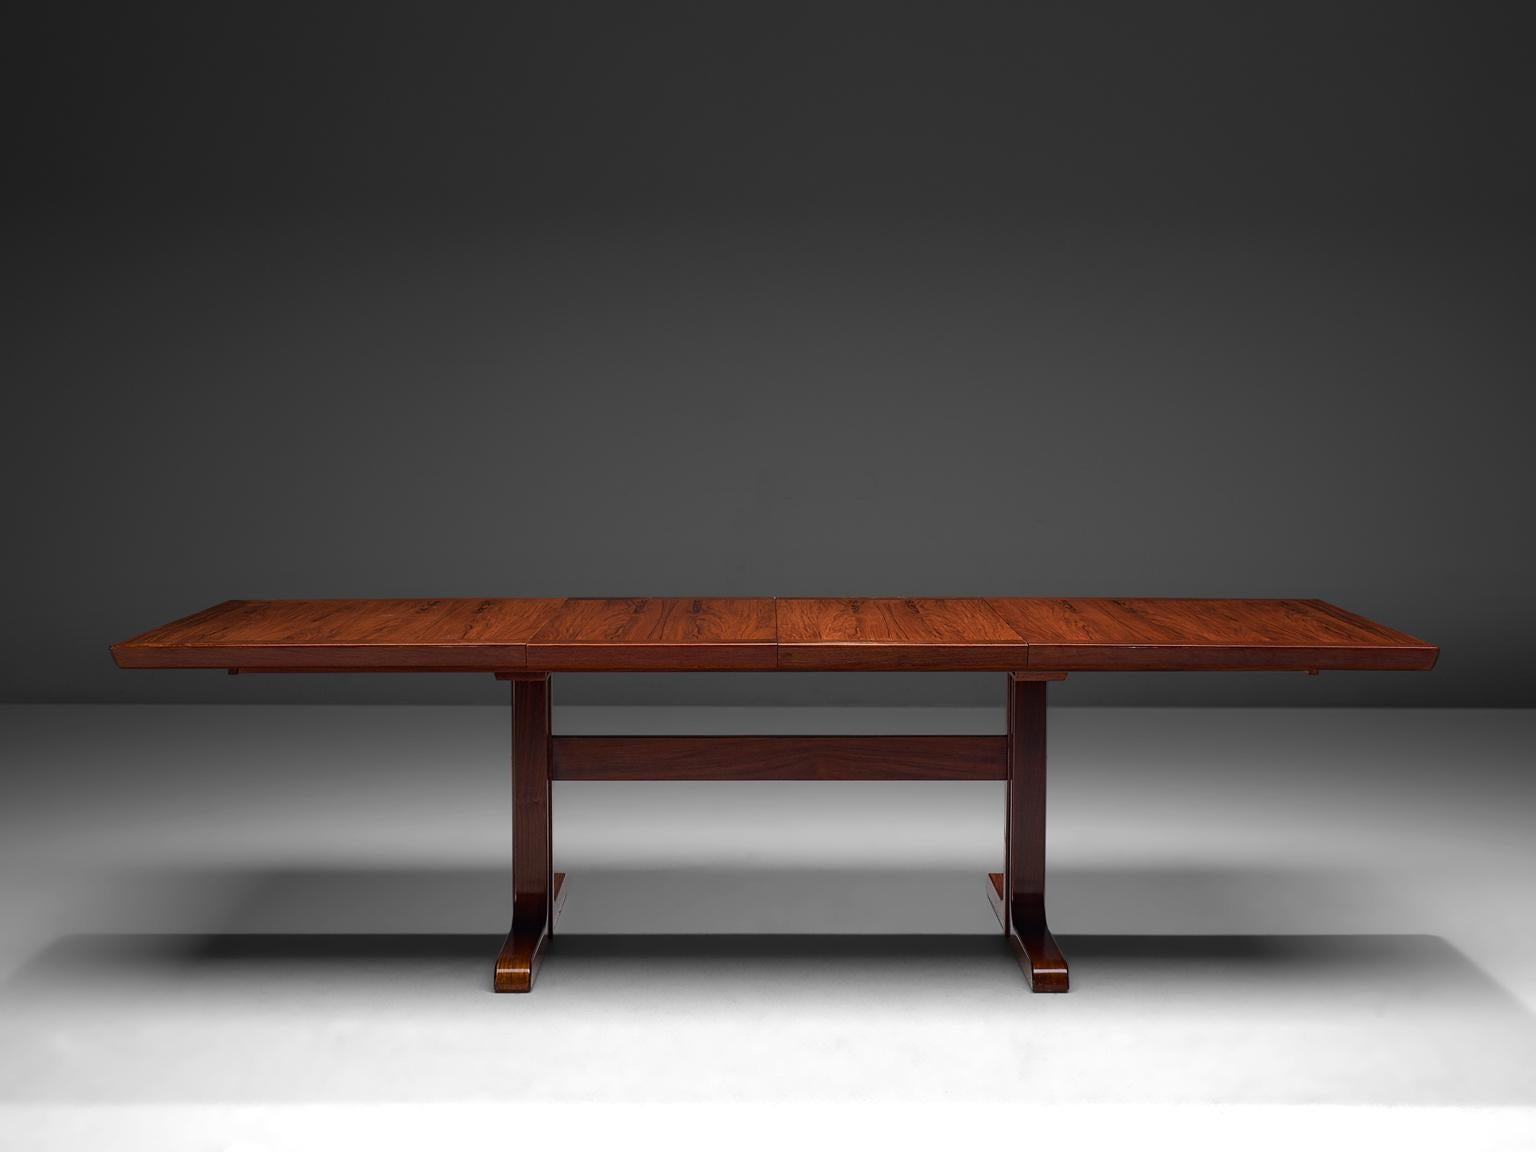 Dining table, rosewood and stained wood, Scandinavia, 1960s

Large rectangular dining table with two additional leafs. The rosewood has a wonderful dark brown-ruby color and shows a beautiful grain on the tabletop. The frame and feet are made of